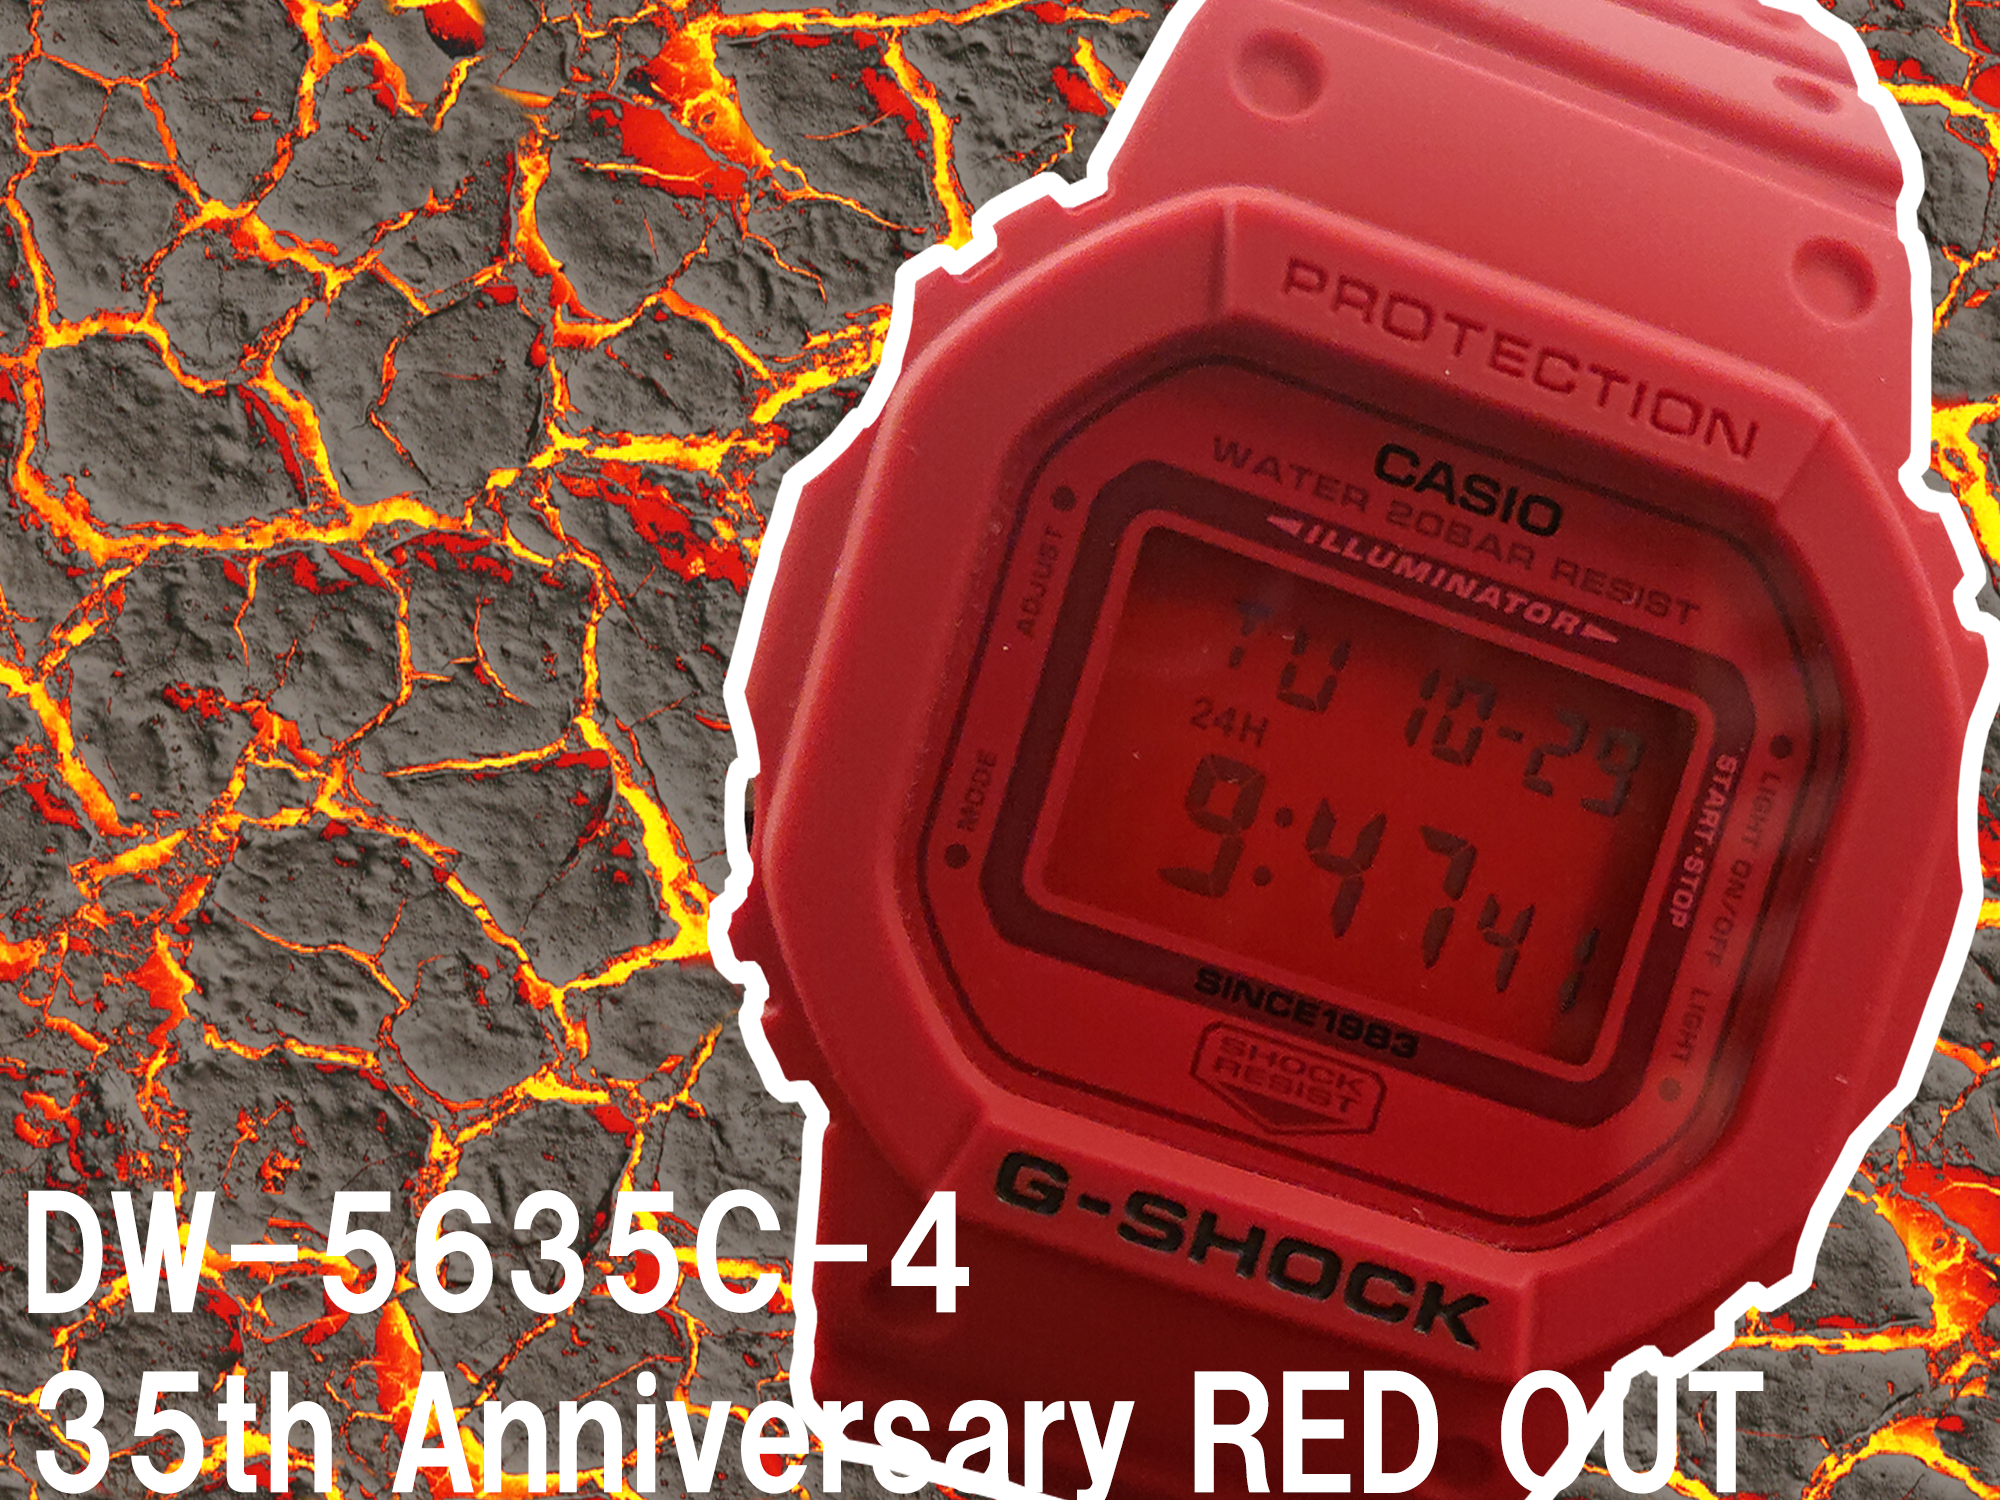 G-SHOCK 35周年 DW-5635C-4JR RED OUT 赤スピード-